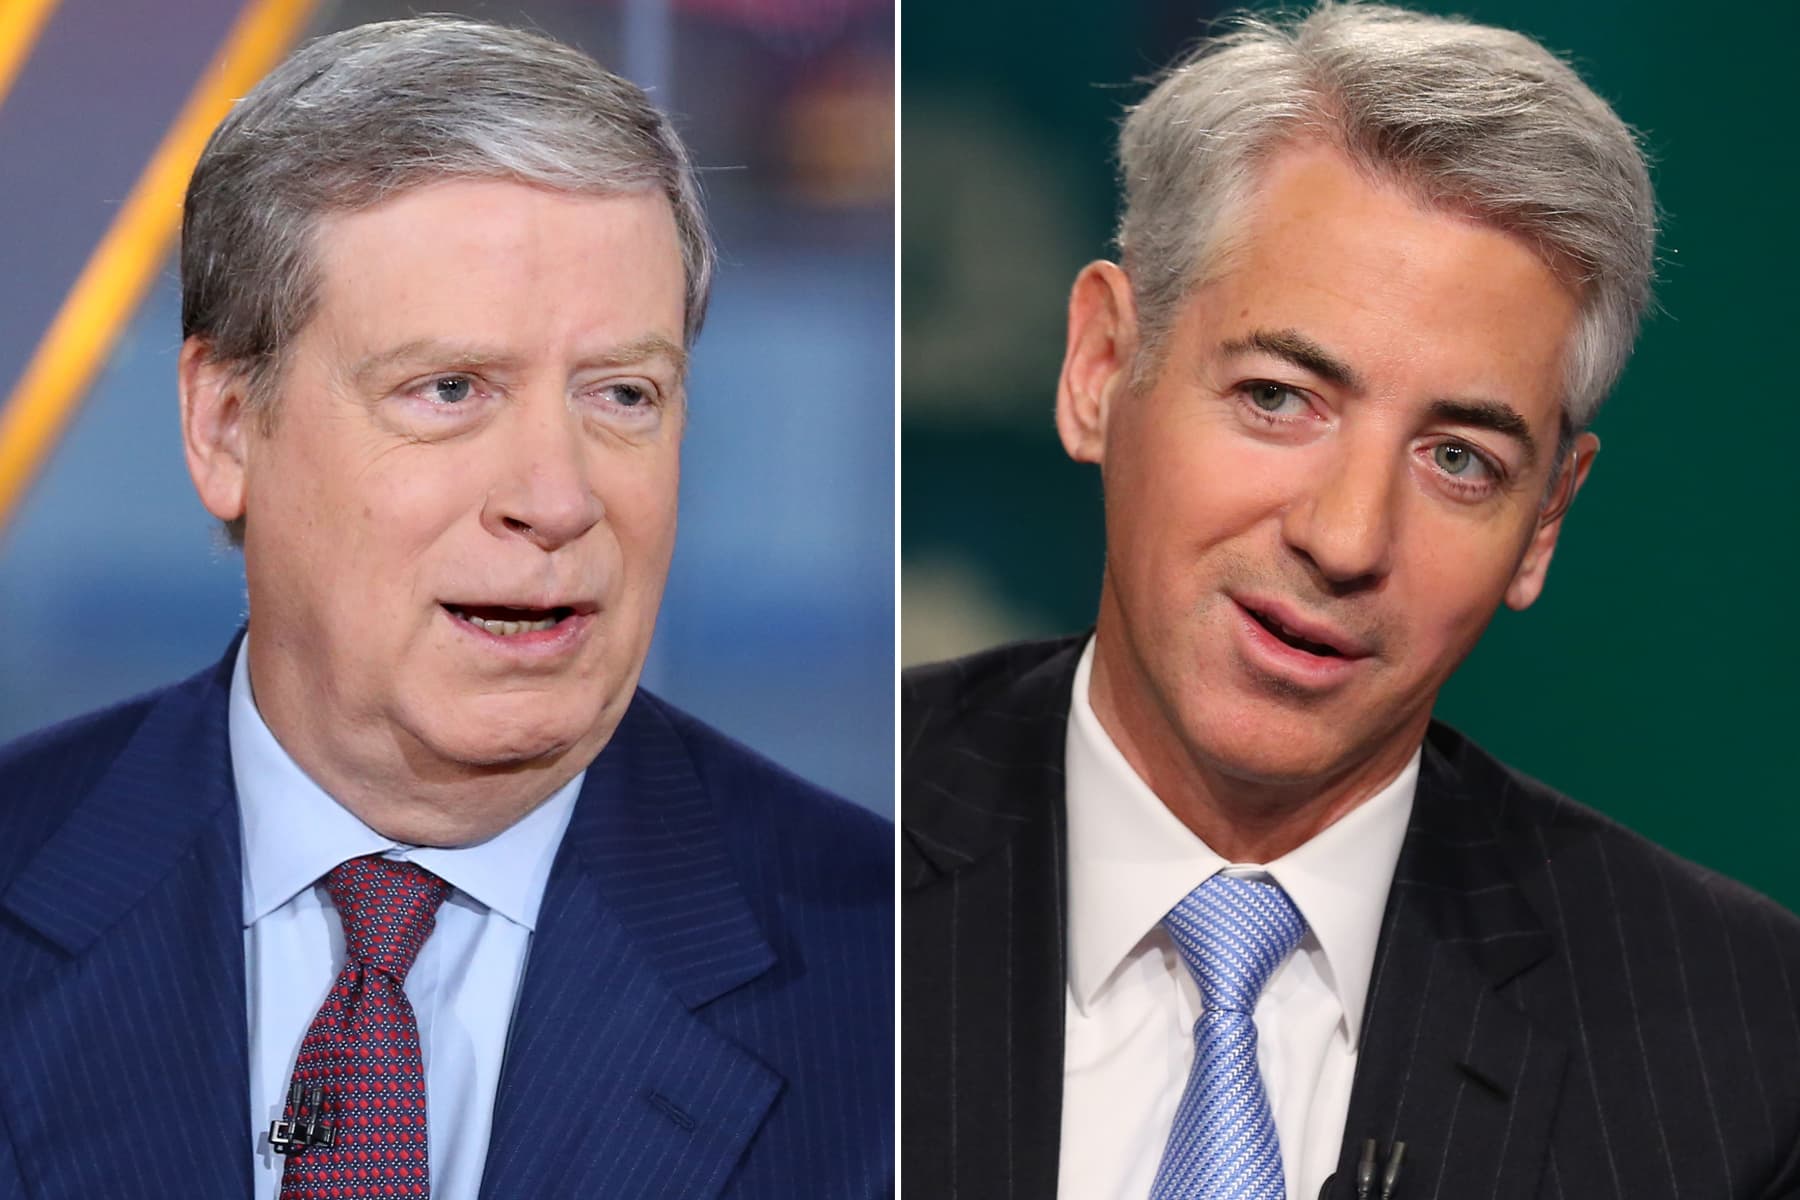 Stanley Druckenmiller, Bill Ackman are among the big early investors in hot IPO Coupang